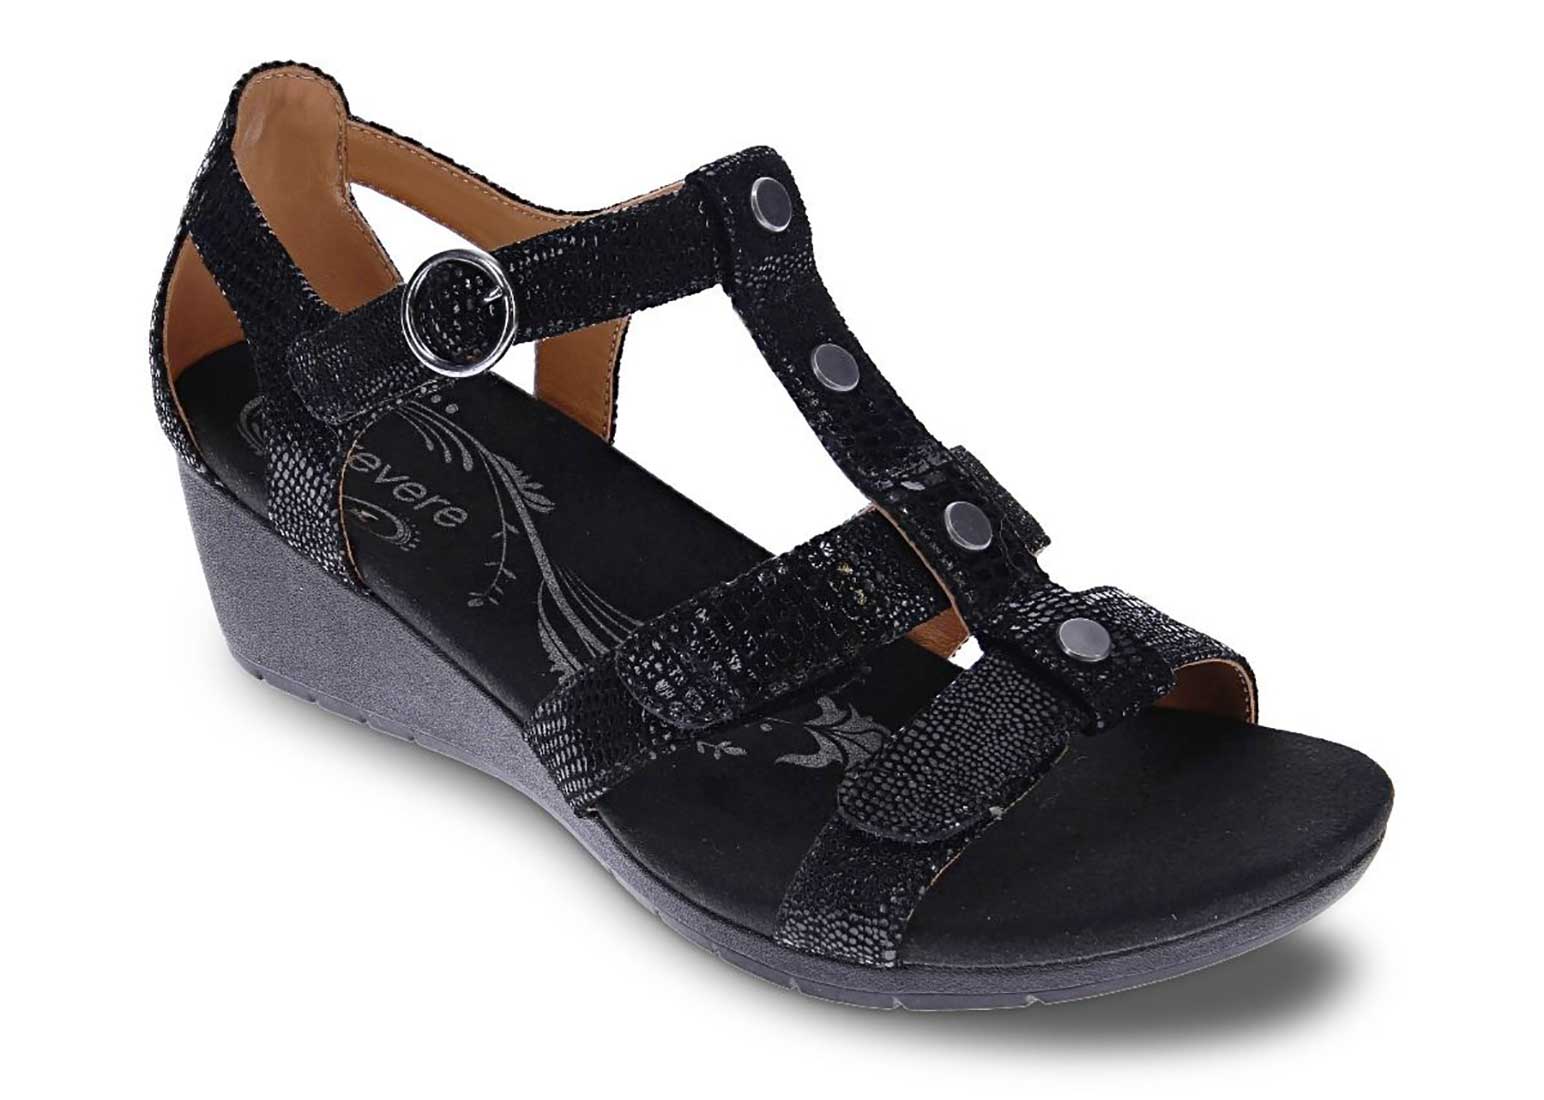 Revere Nassau - Women's Sandal Wedge - Medium - Extra Depth With Removable Foot Beds